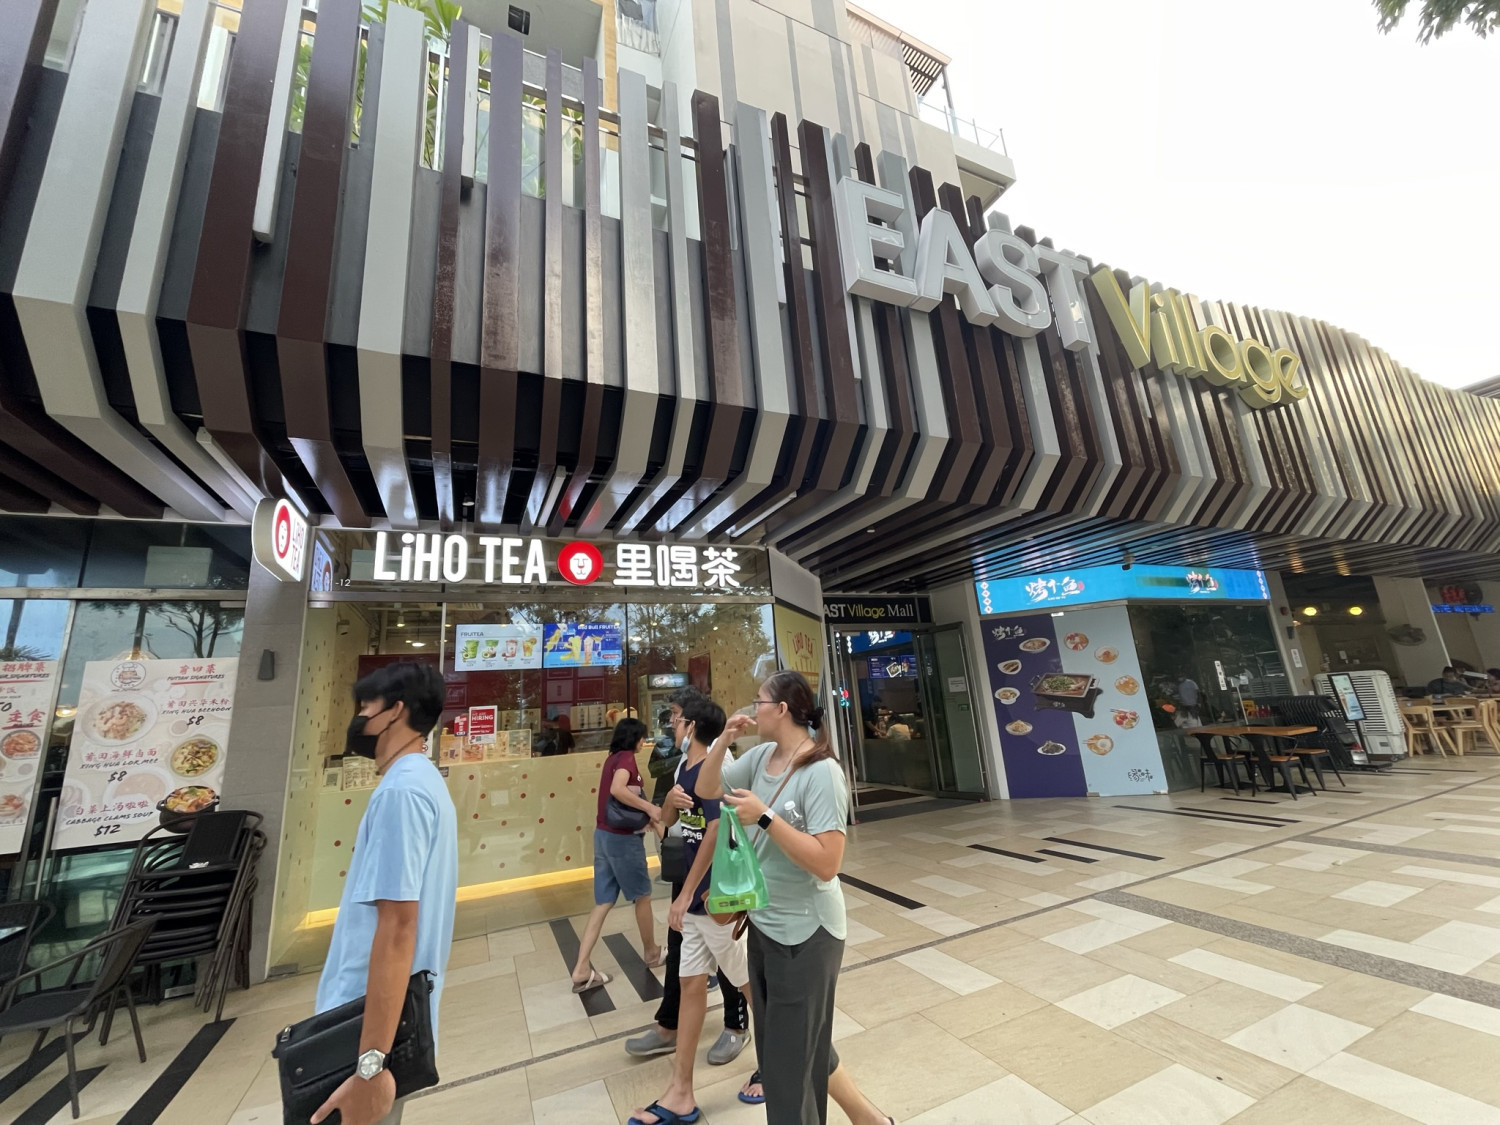 Two F&B strata retail units at East Village to be sold from $10.4 mil collectively, or $5.3 mil each - Property News